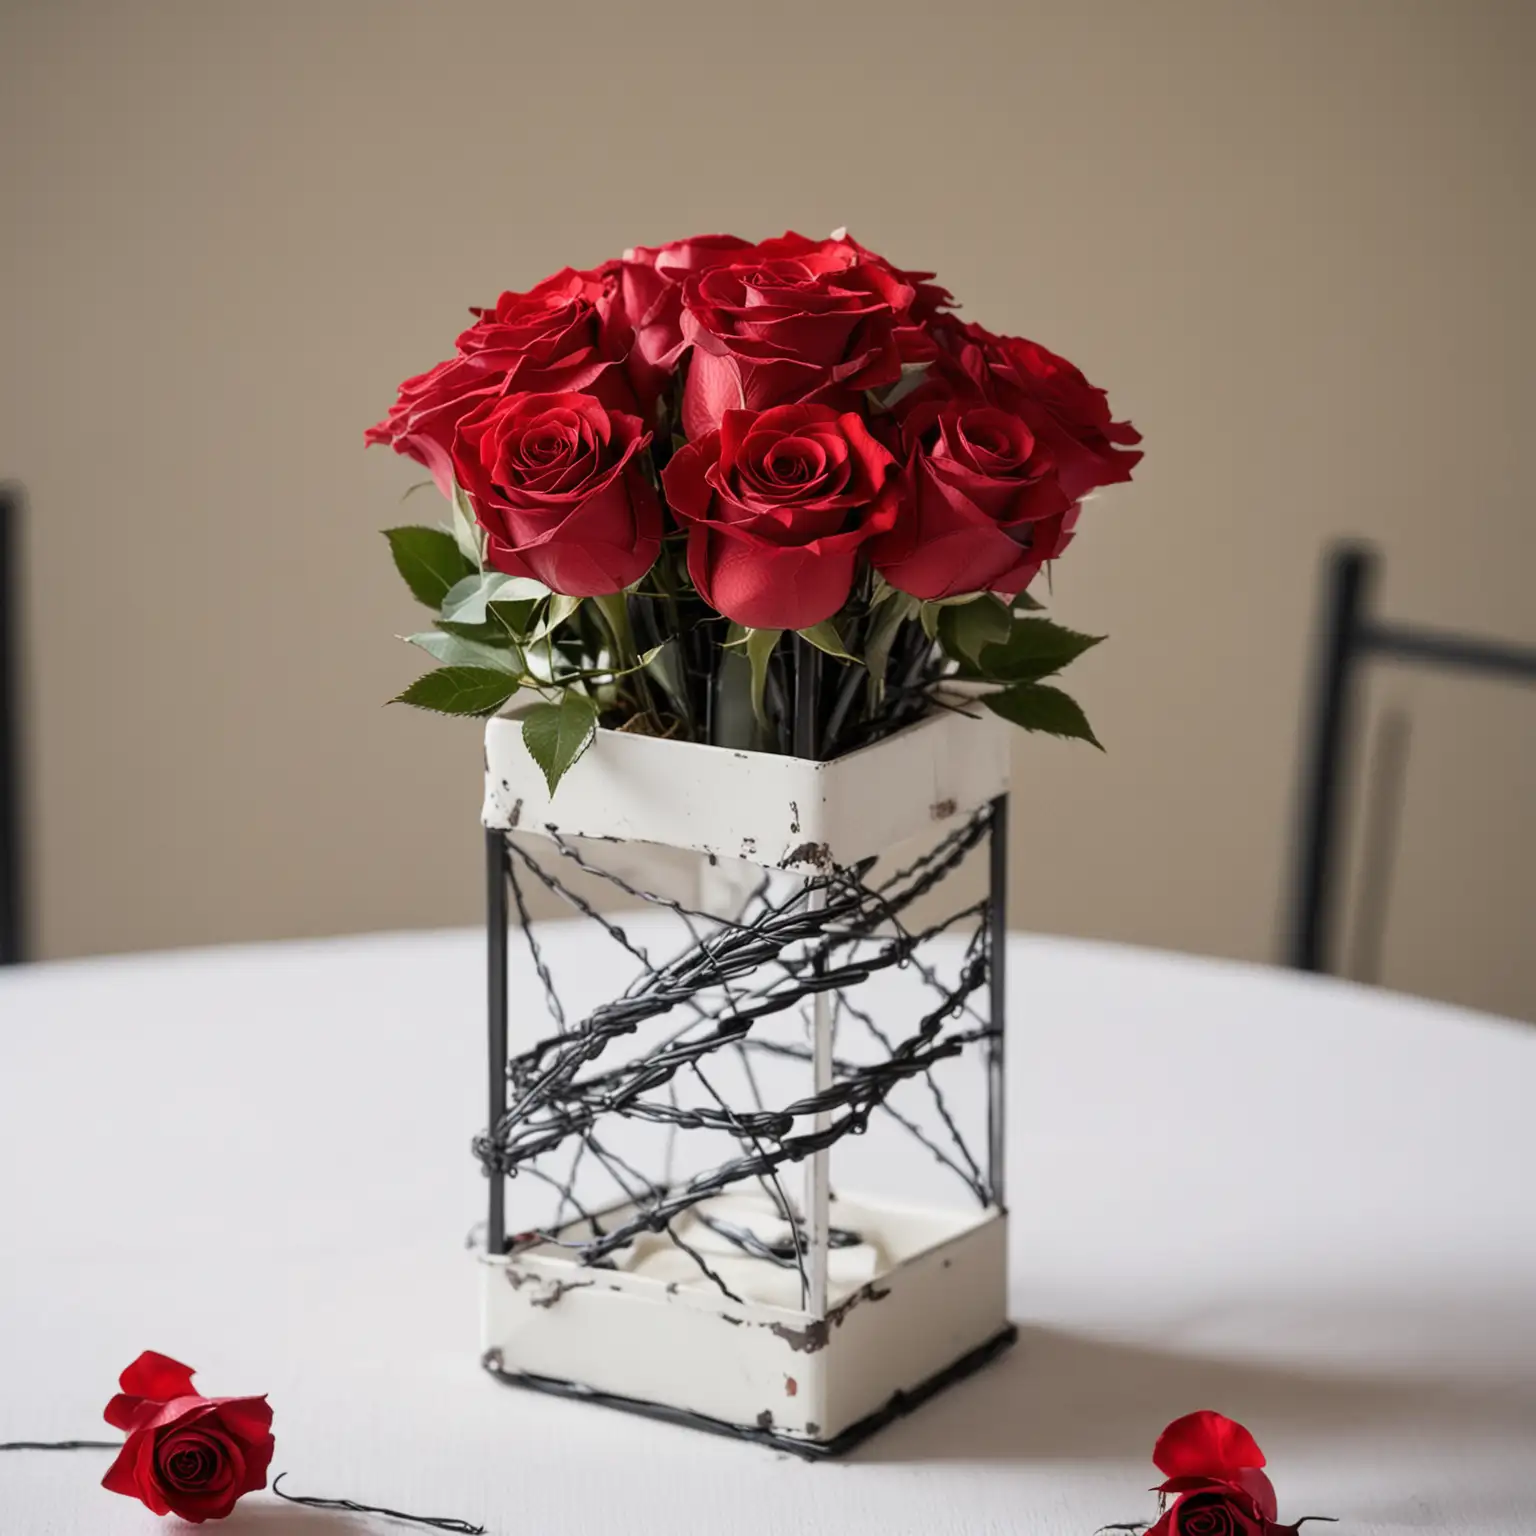 DIY-Modern-Wedding-Centerpiece-with-Red-Roses-in-White-Metal-Vase